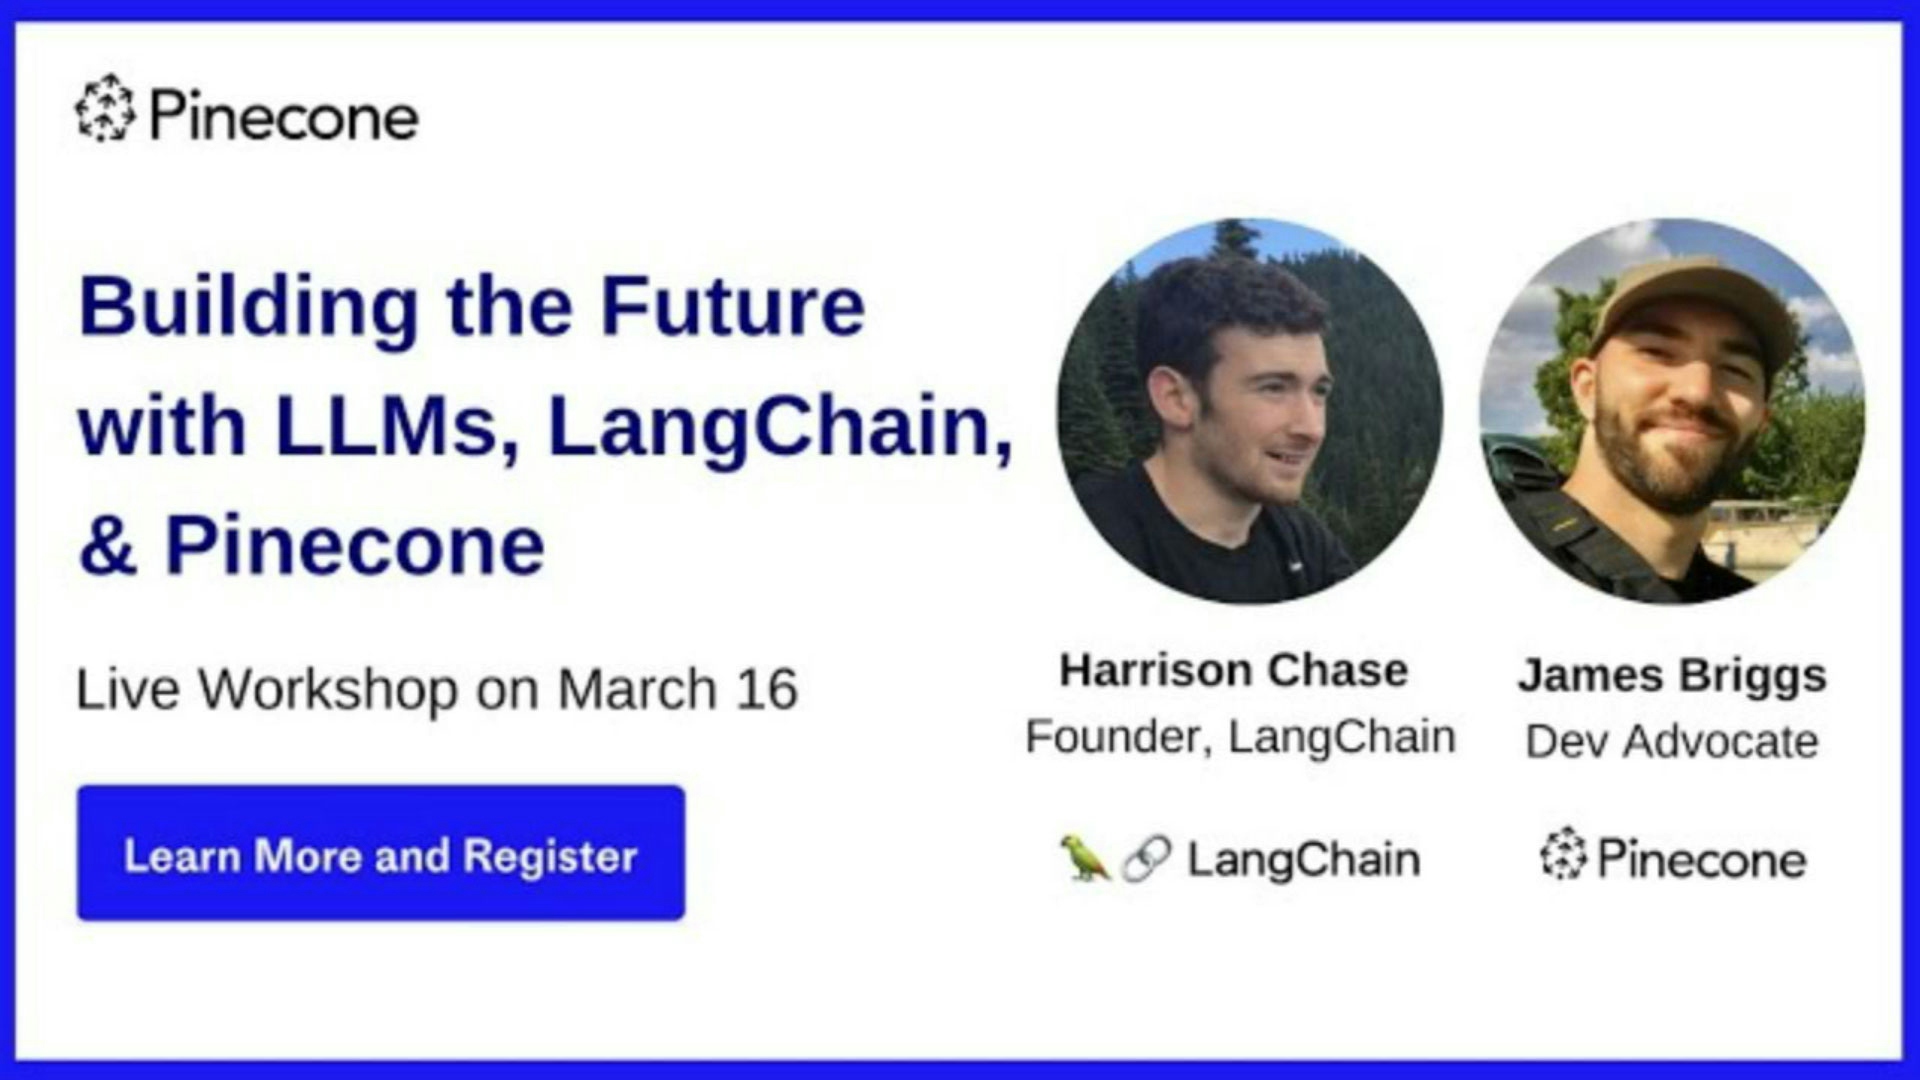 Building the Future with LLMs, LangChain, & Pinecone